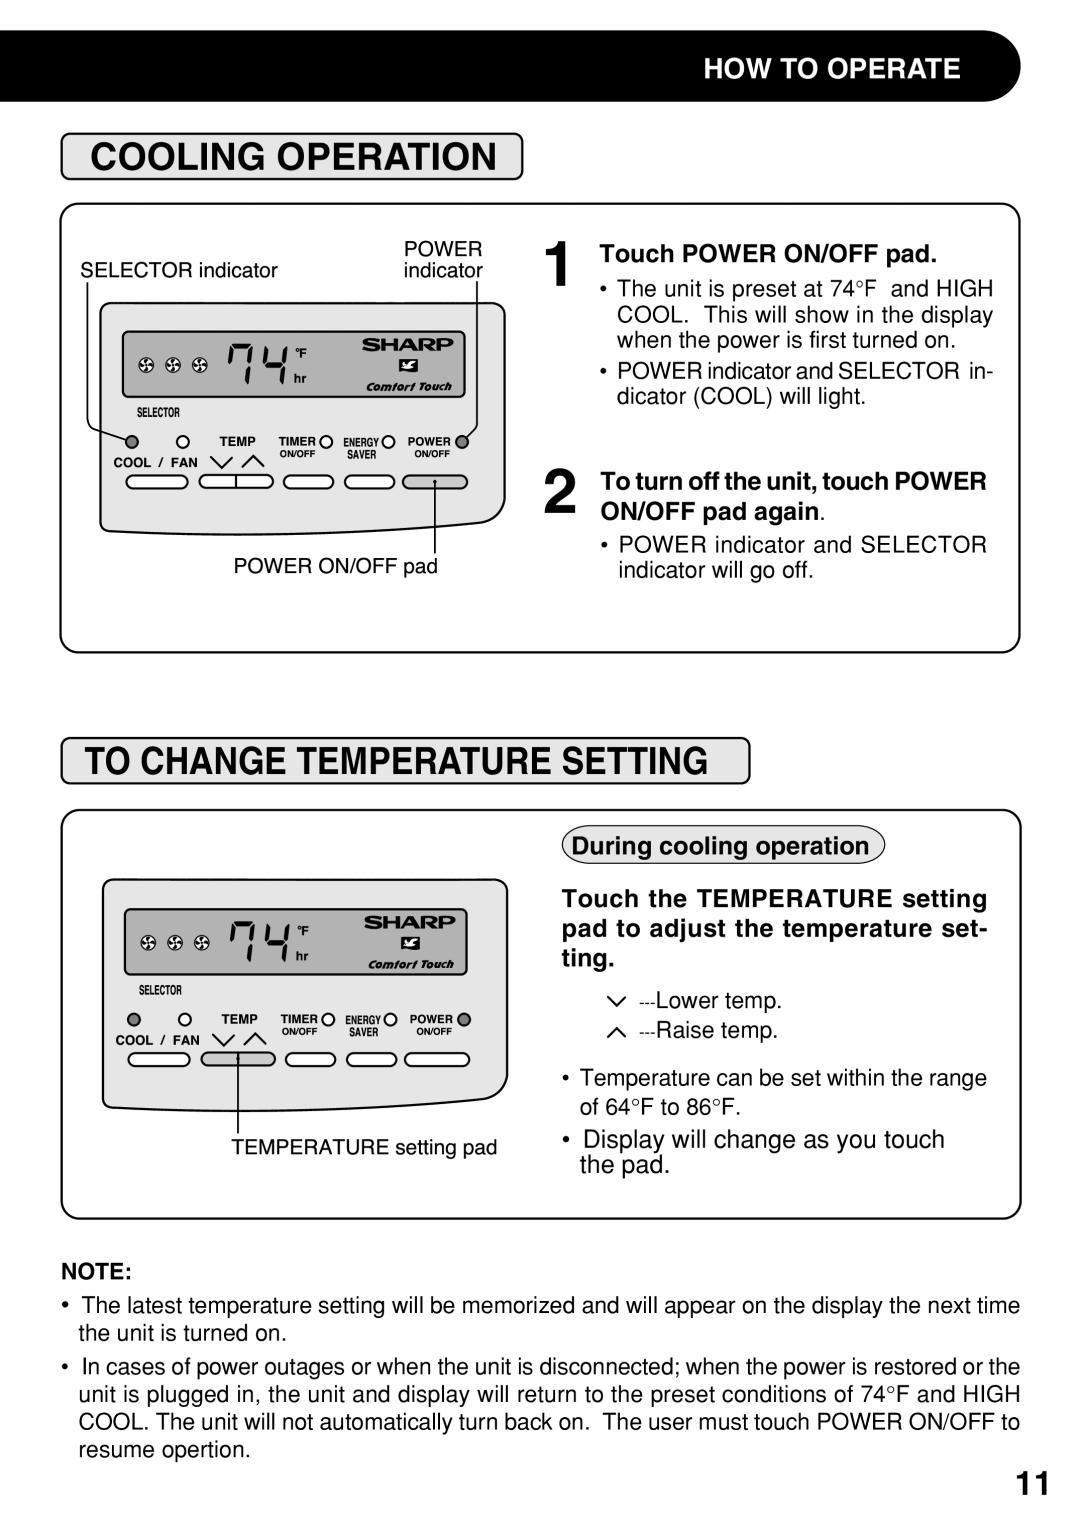 Sharp AF-S120DX, AF-S100DX To Change Temperature Setting, How To Operate, Touch POWER ON/OFF pad, ON/OFF pad again 